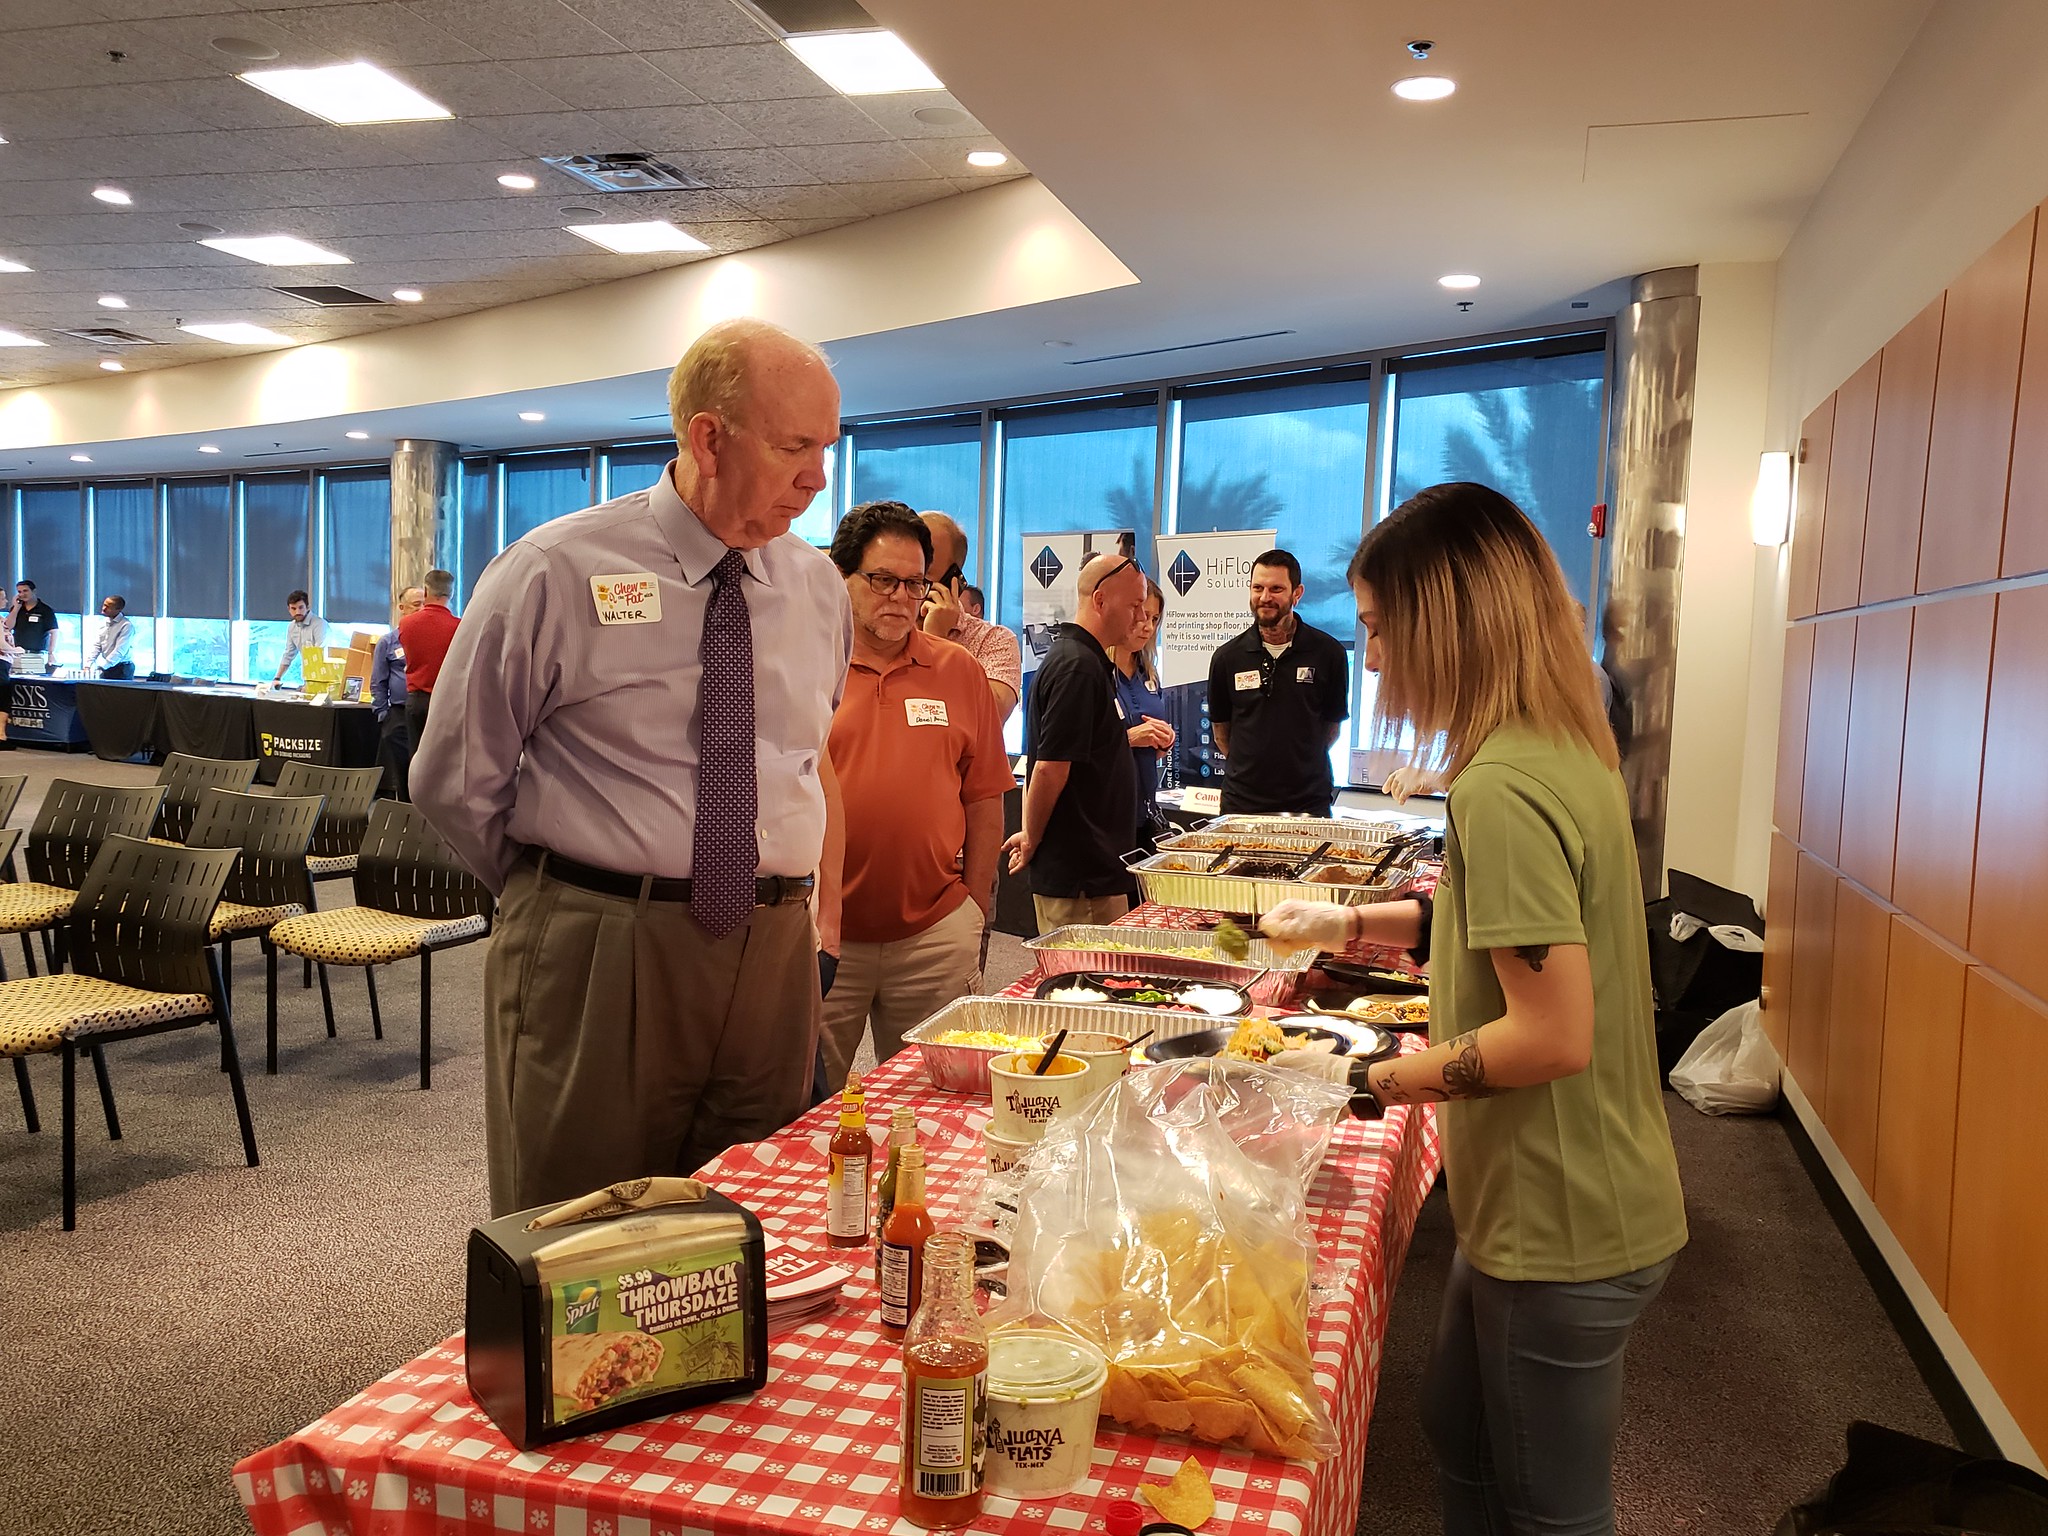  Florida graphics community joined together at   FGA NETWORKING EVENTS    Learn More  